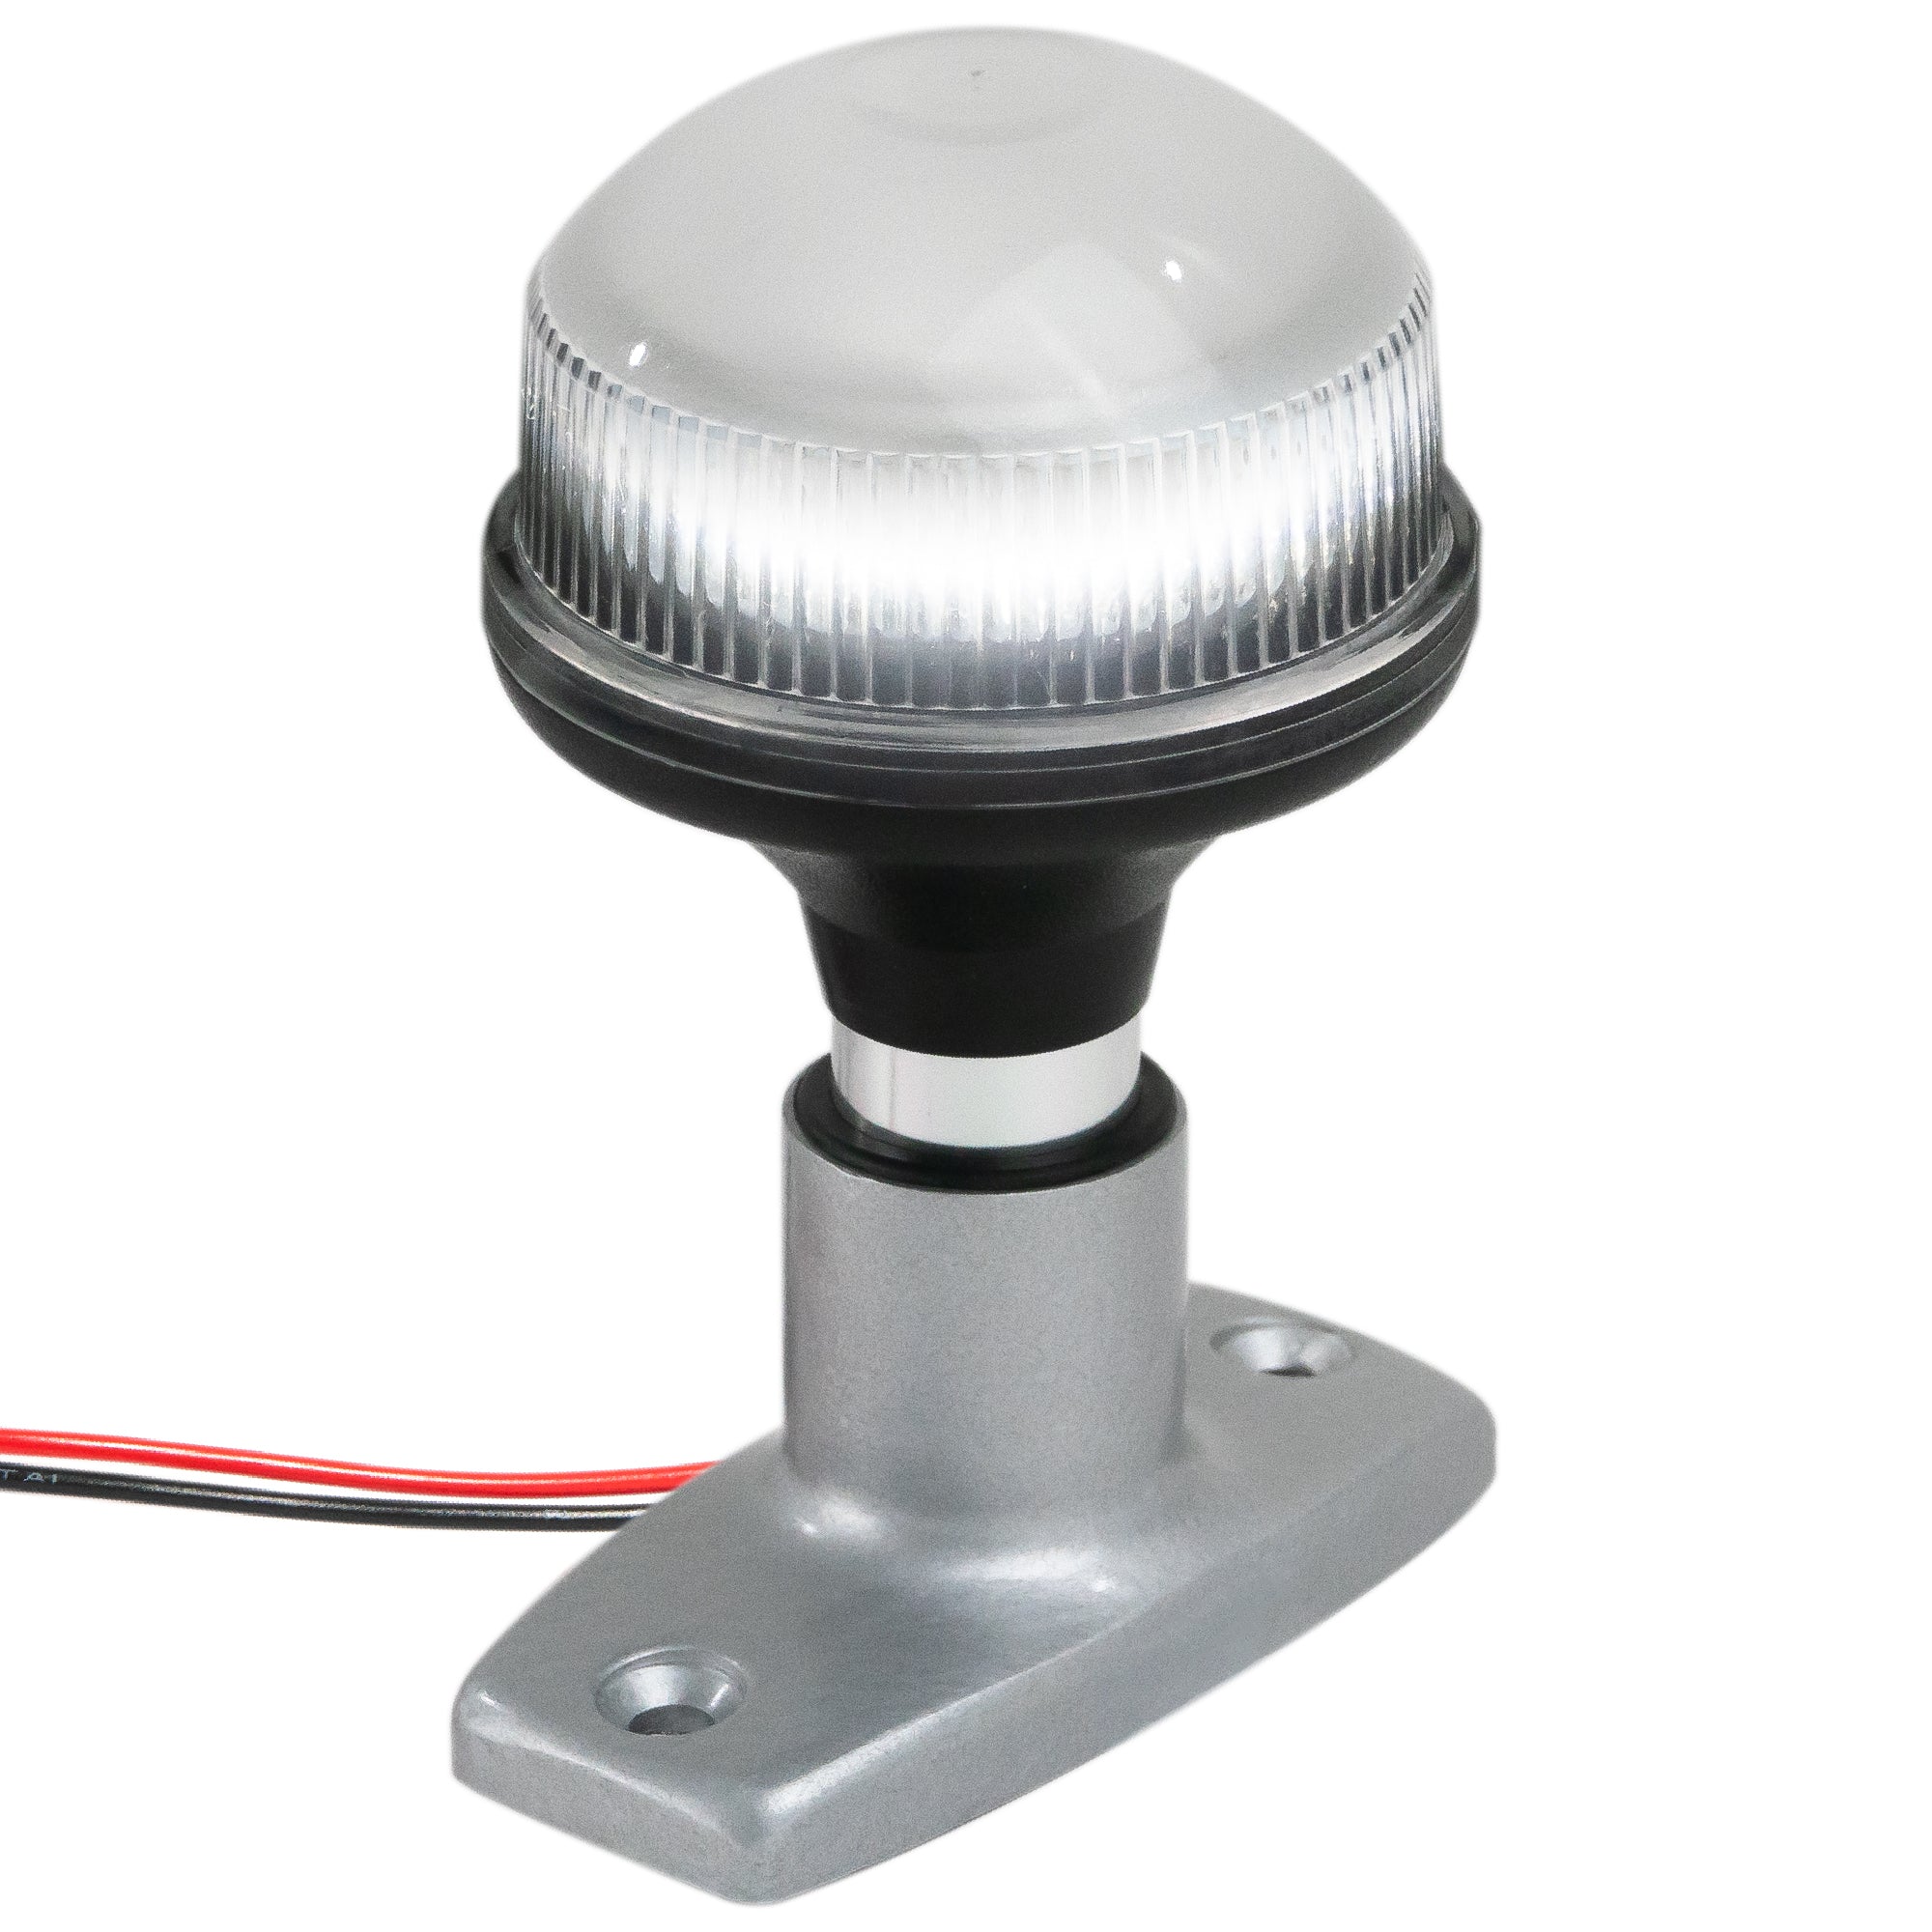 LED Anchor Navigation Light 4", Fixed Mount, 2NM - FO2874